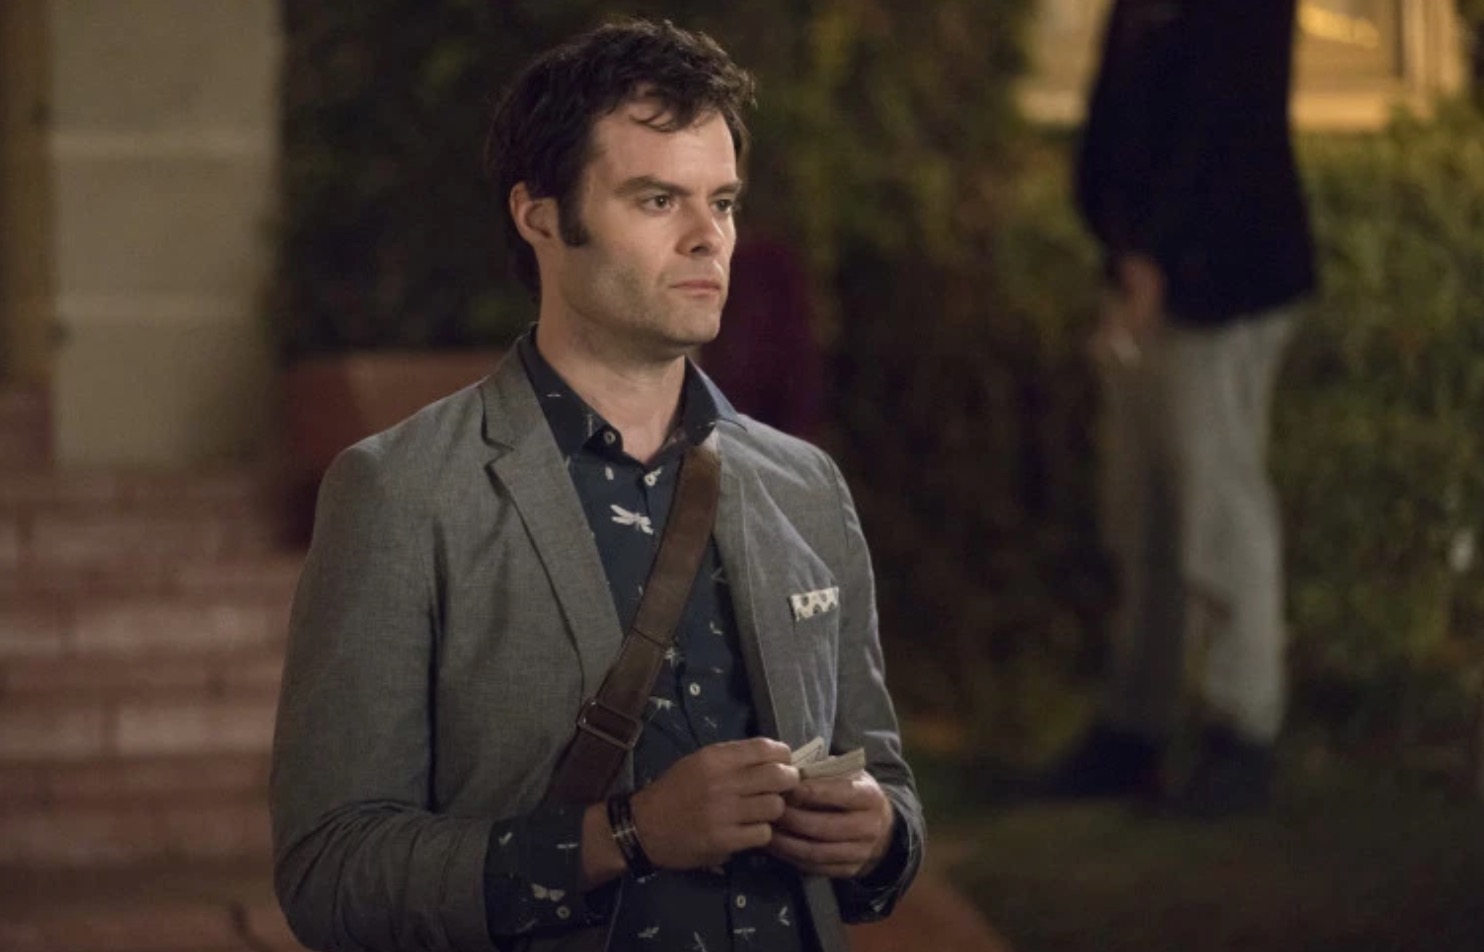   Bill Hader in Barry  images - HBO 